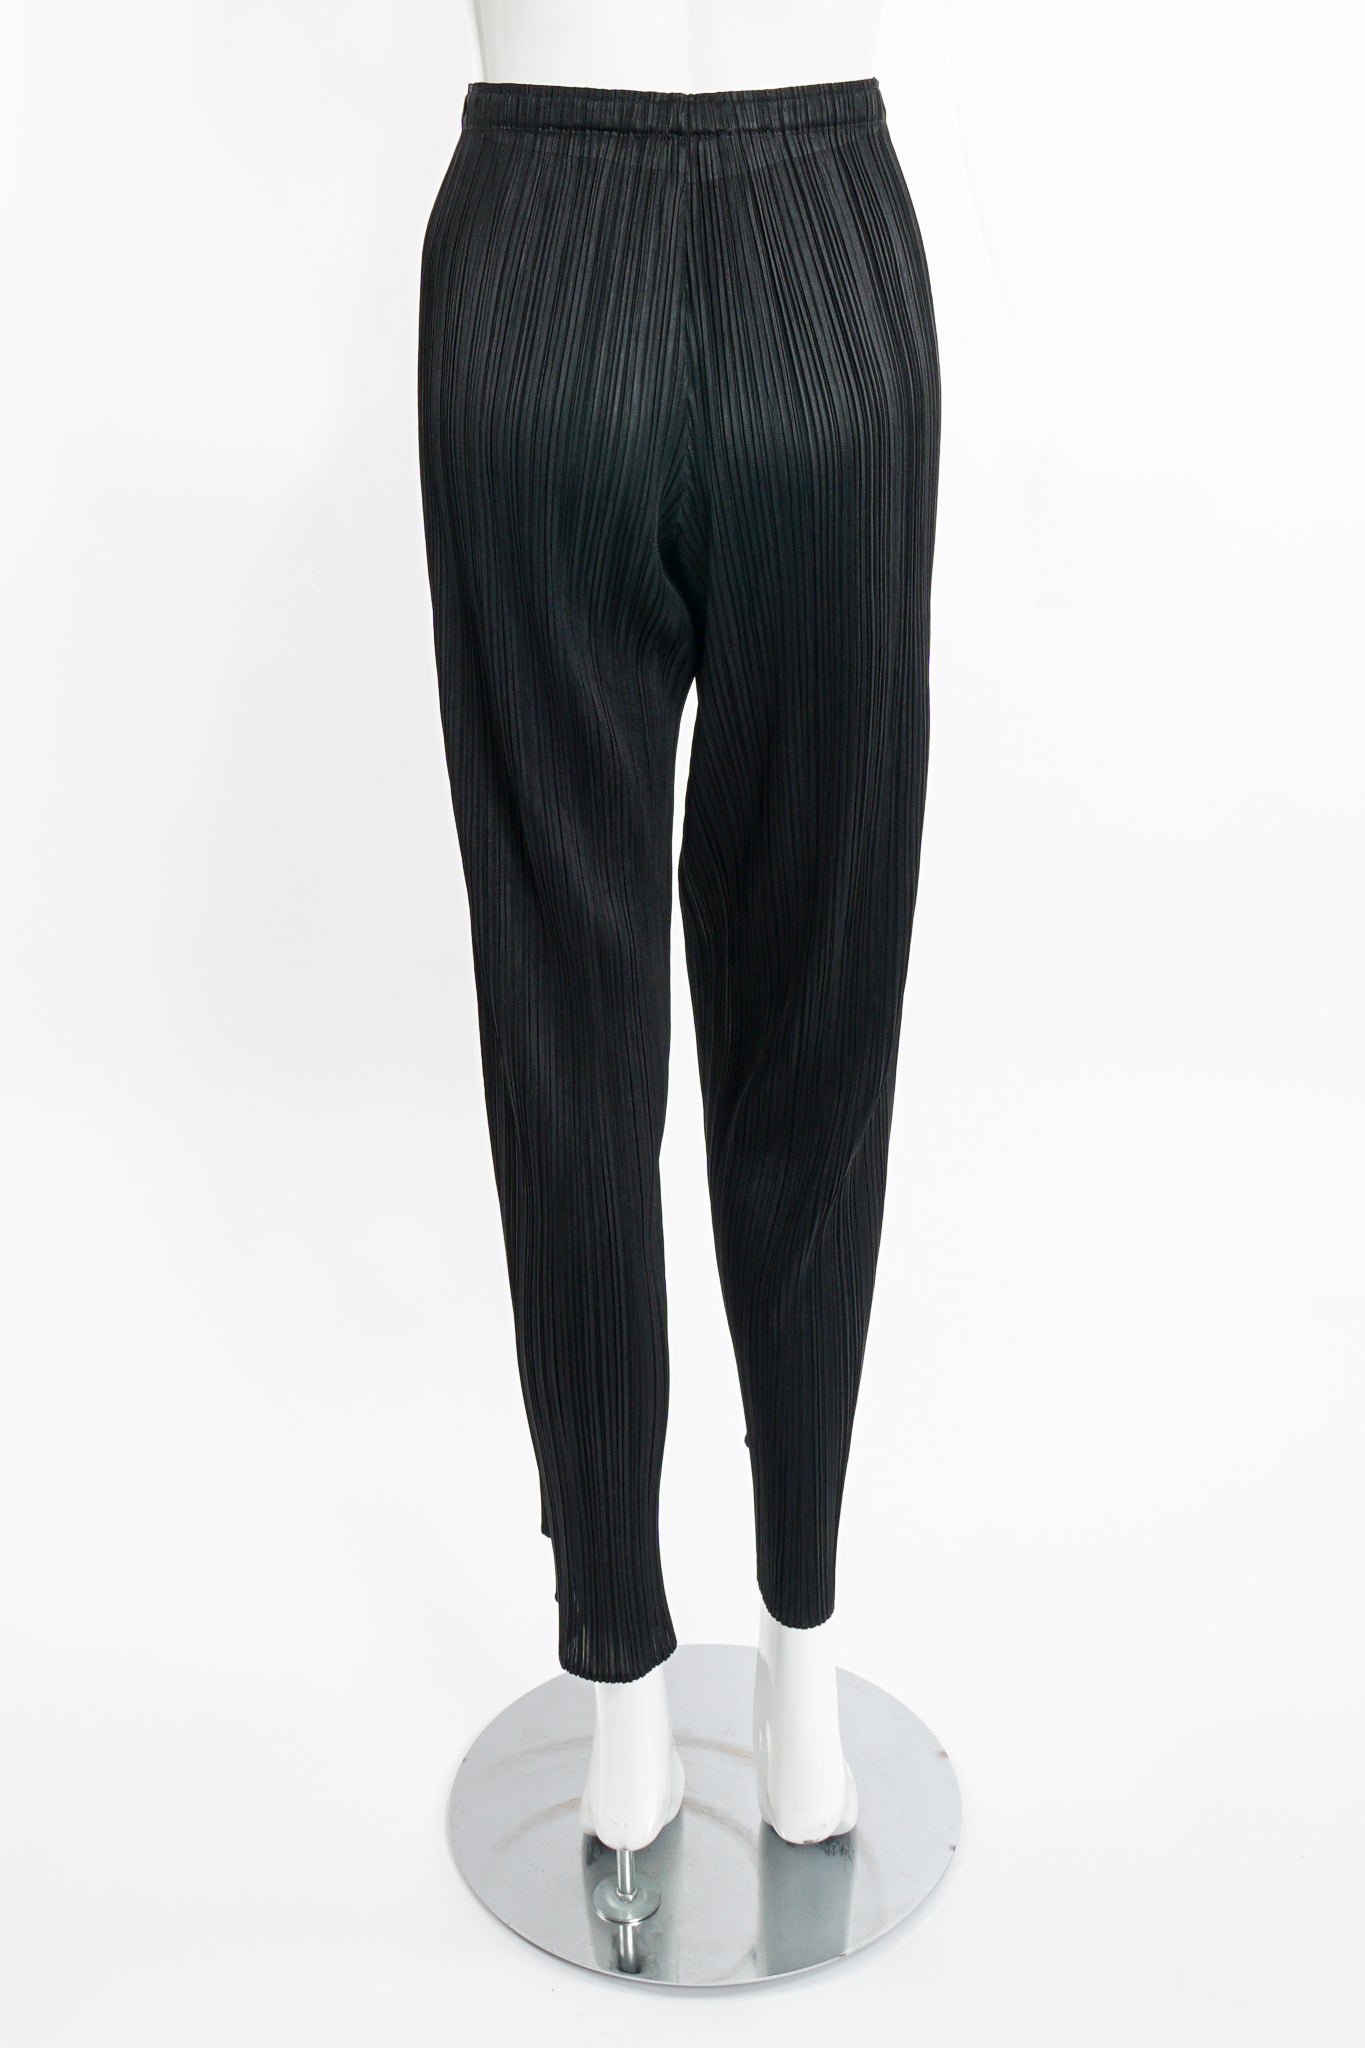 Vintage Issey Miyake Pleats Please Black Pleated Ankle Pant on Mannequin back at Recess LA